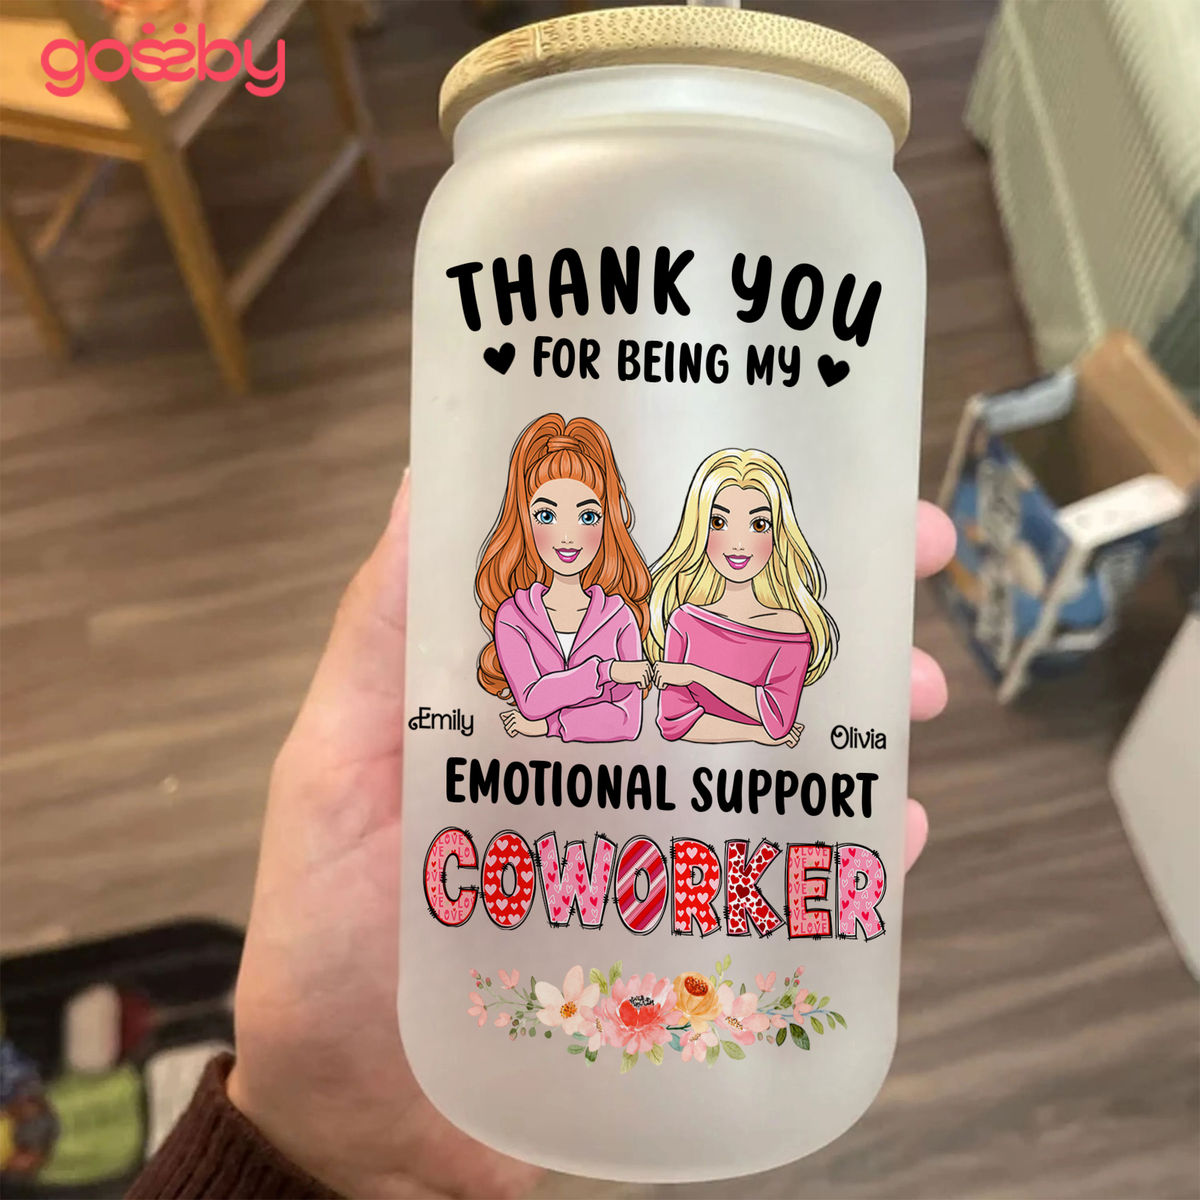 Thank you for being my emotional support coworker - Bestie Personalized Custom Glass tumbler - Gift For Best Friends, BFF, Sisters, Coworkers